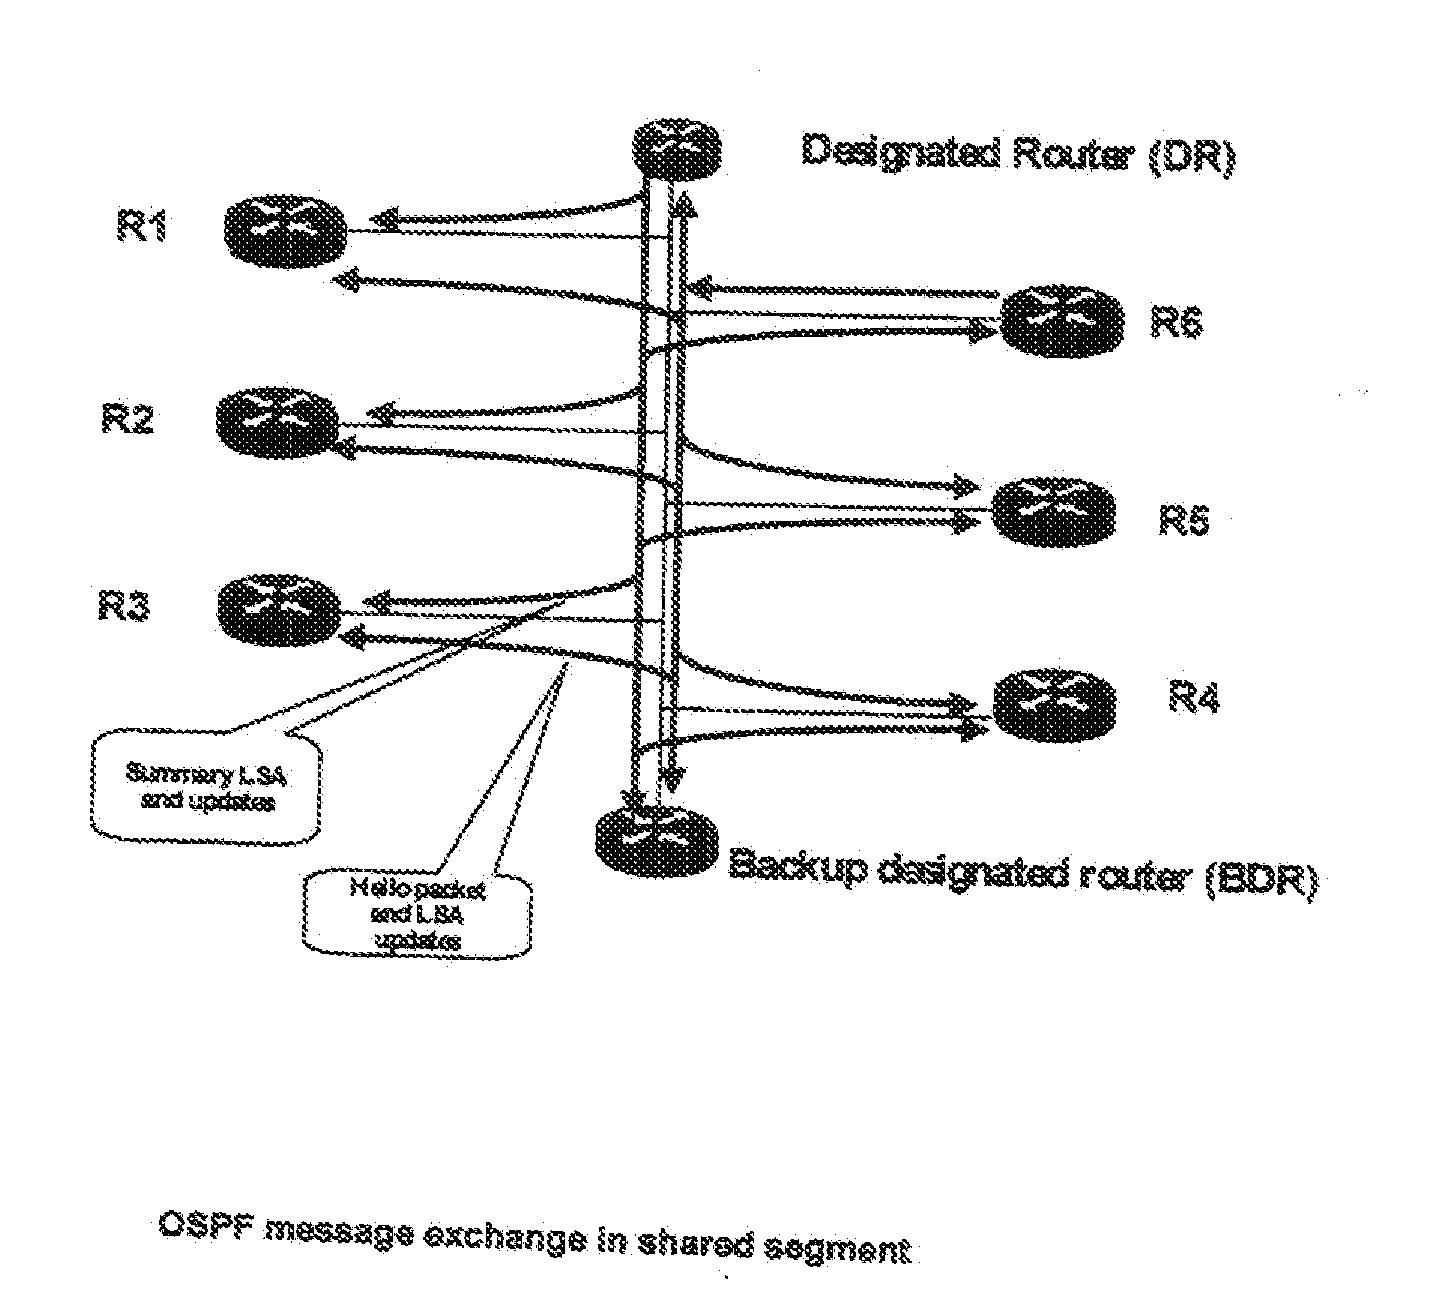 System and method for nodes communicating in a shared network segment